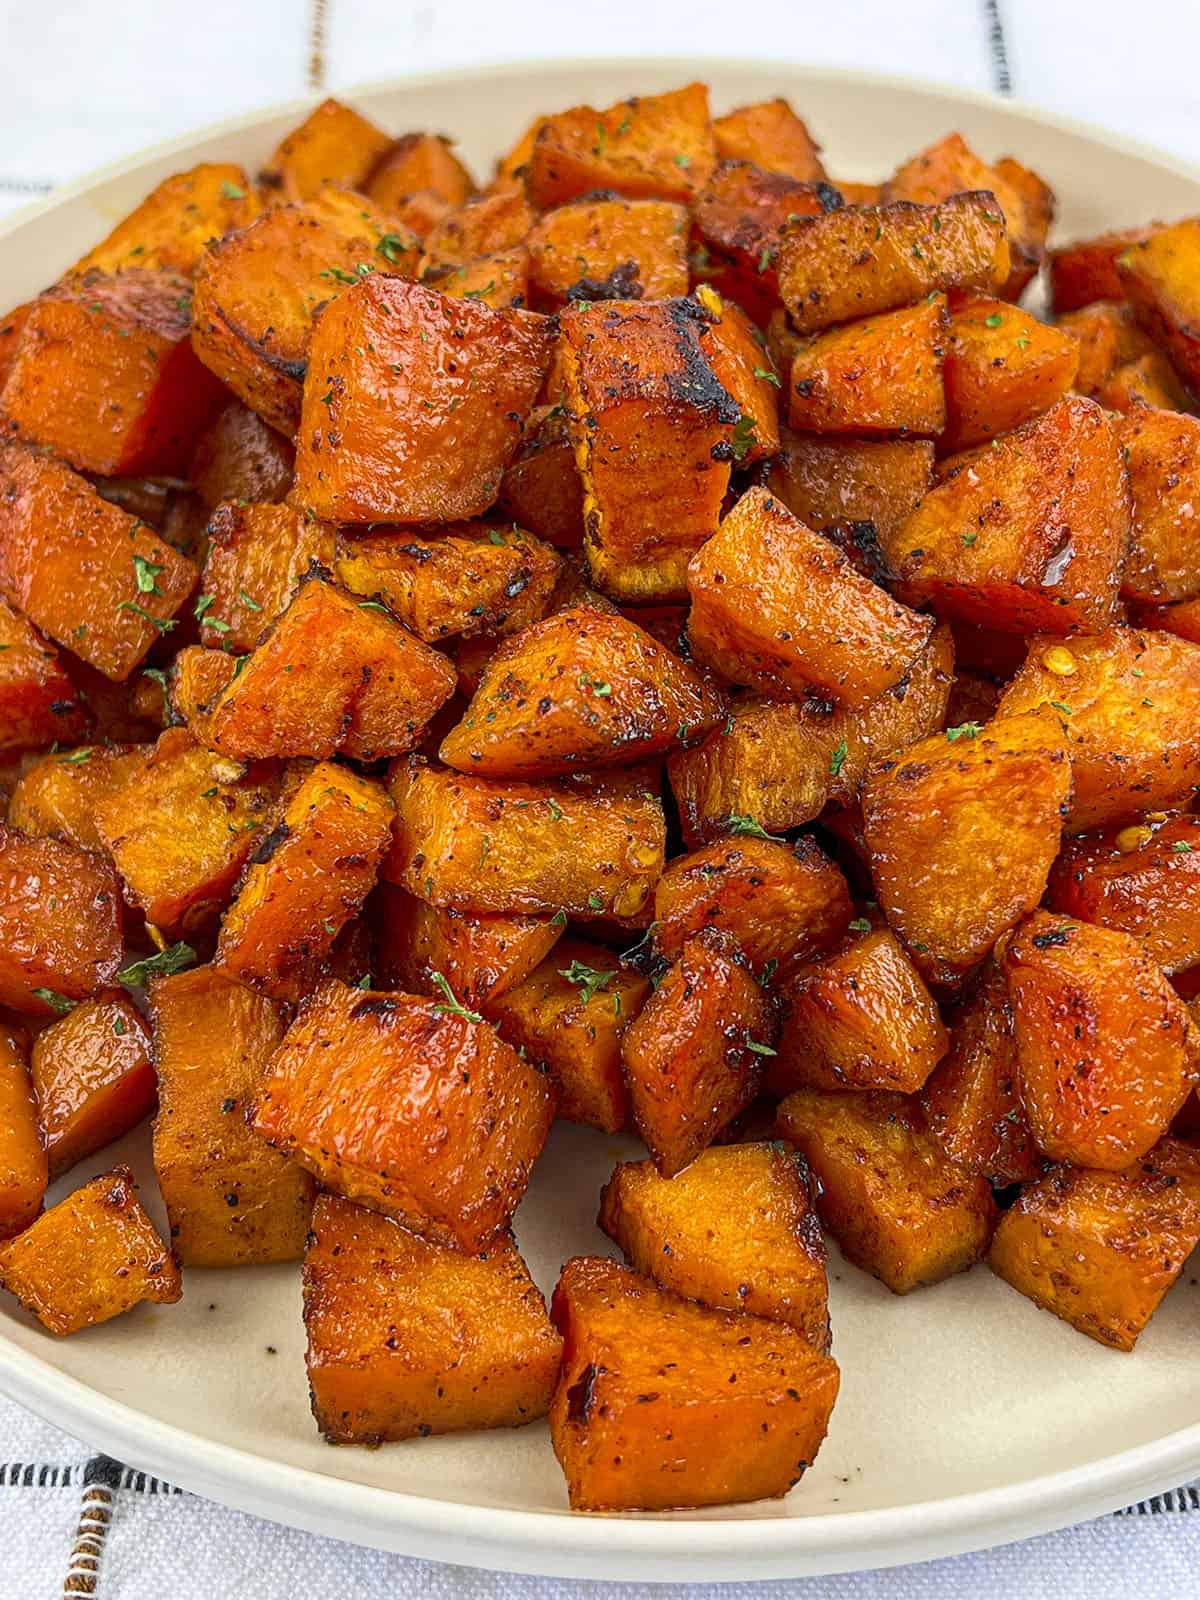 A pile of spicy sweet potatoes on a grey plate.